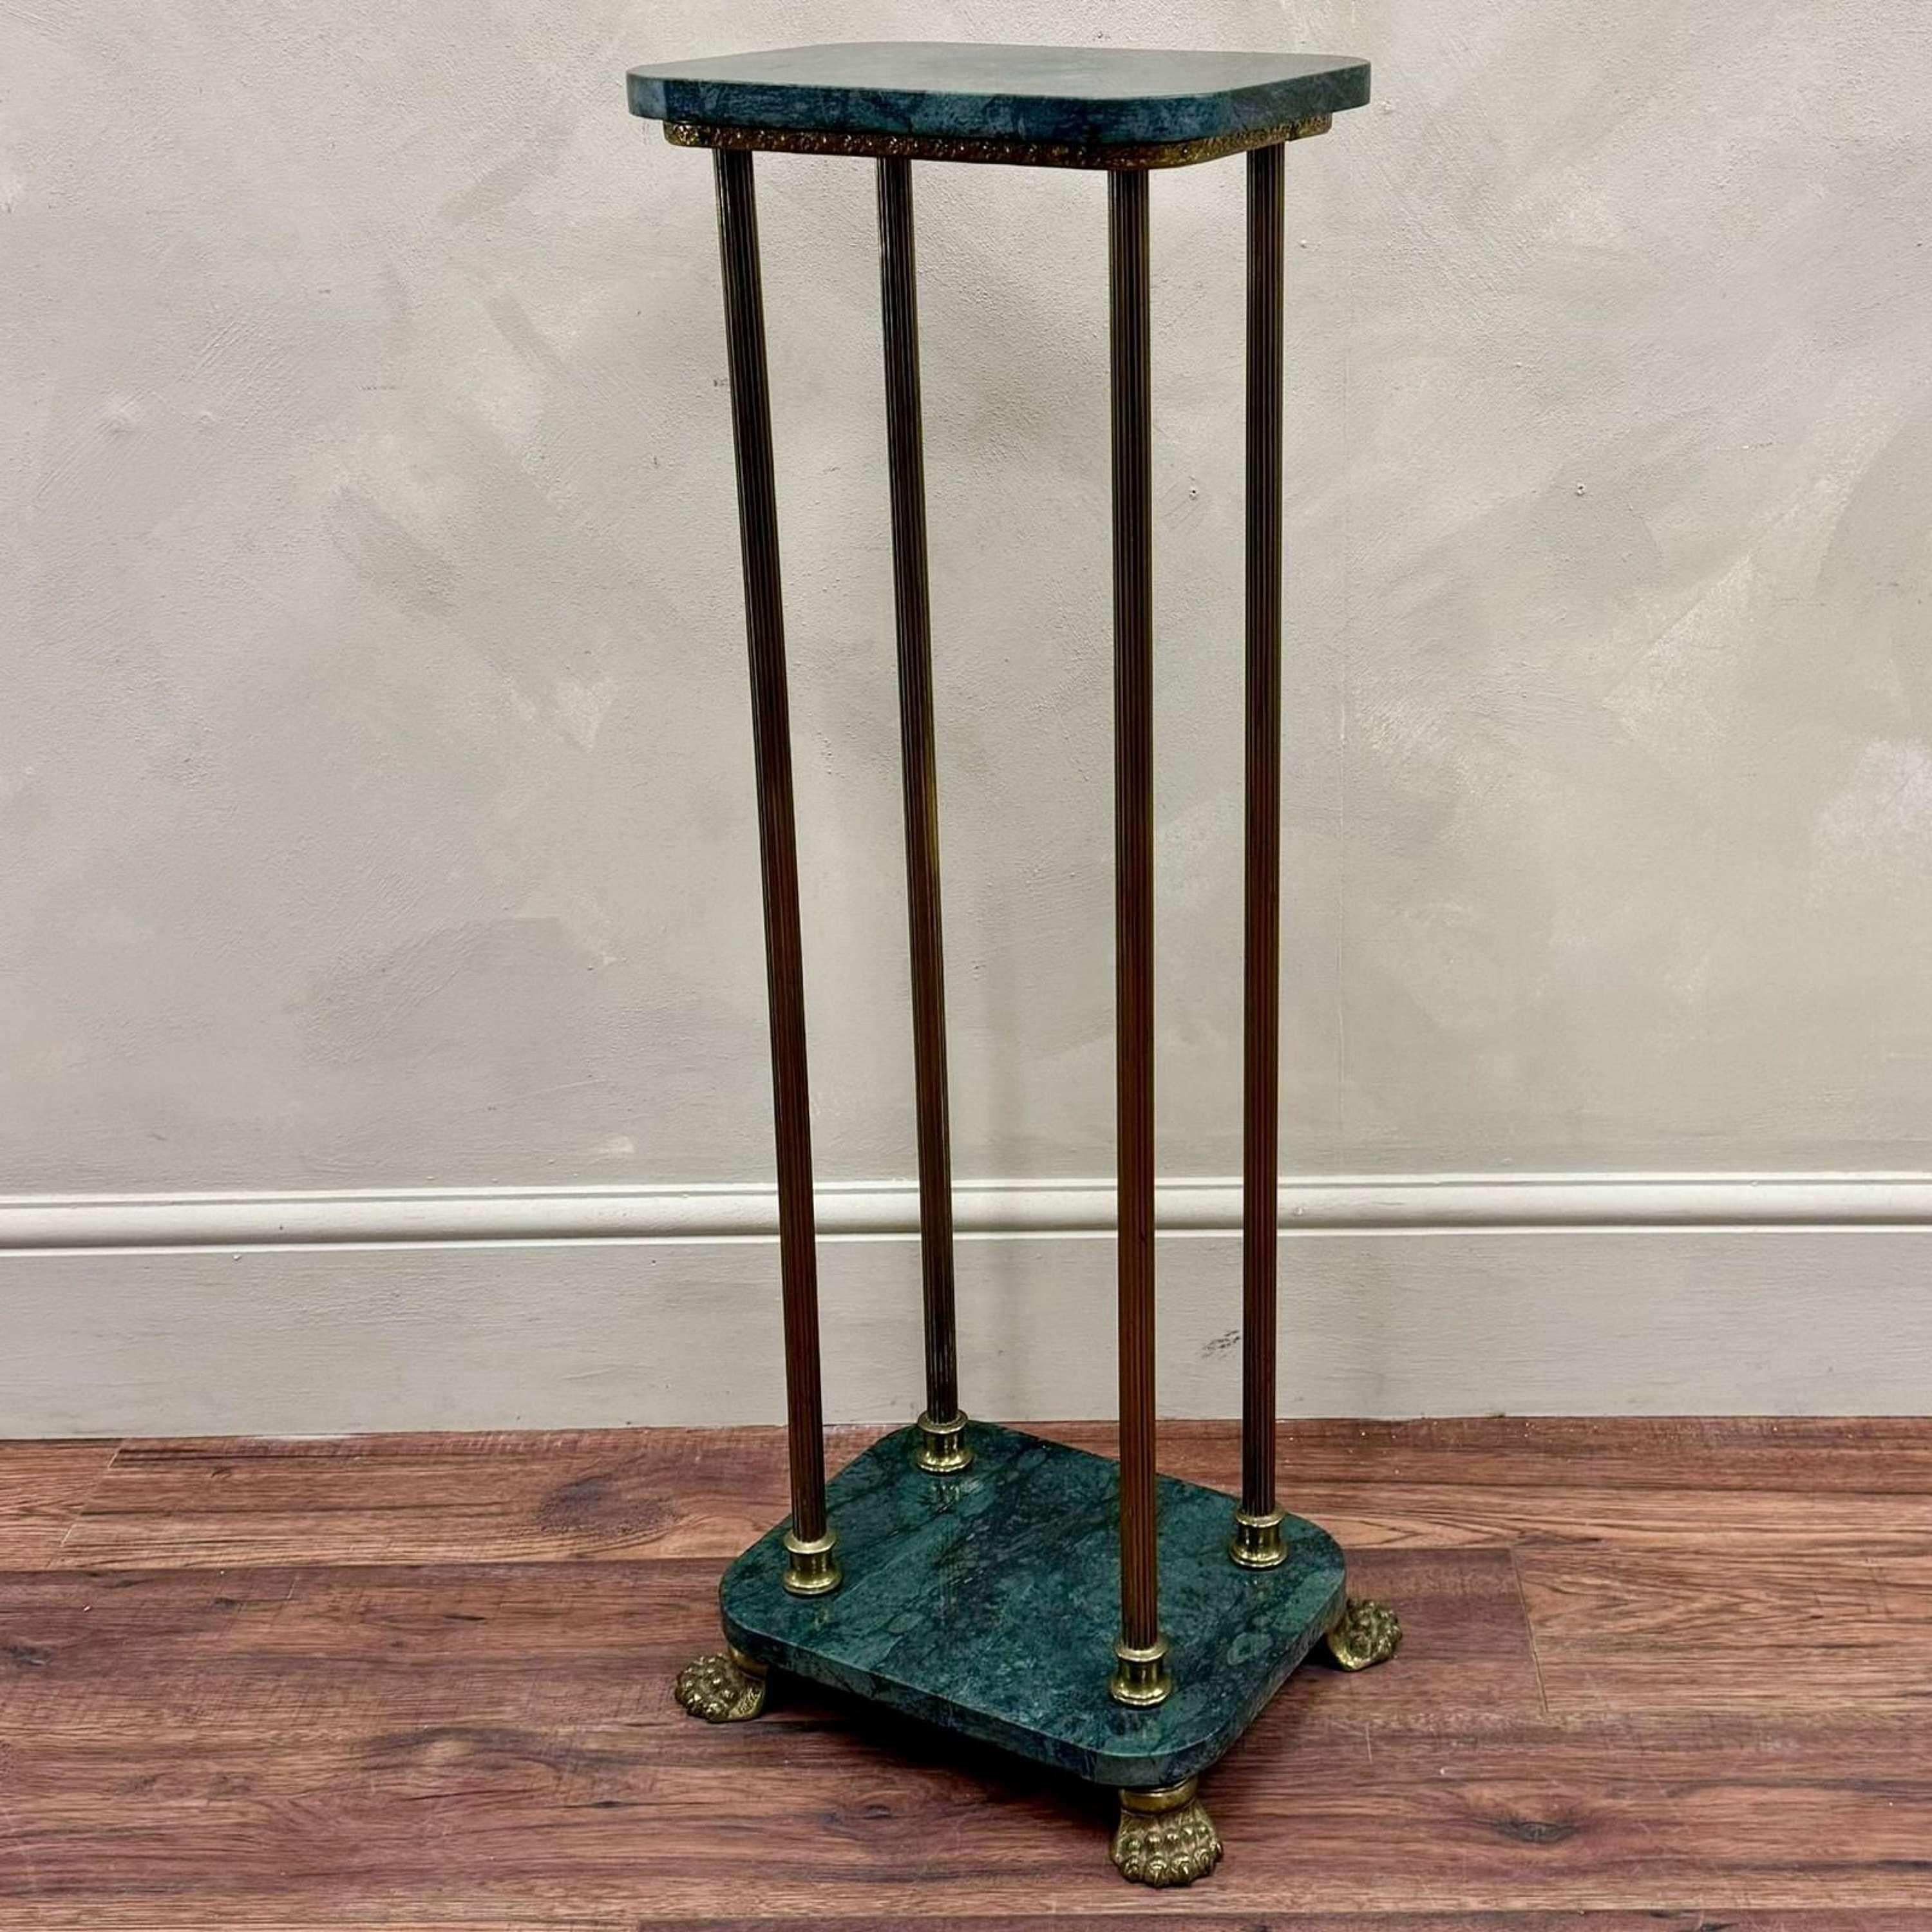 Marble and brass pedestal / plant stand 
Brass reeded columns joining a marble base with lion paw brass feet. 
France, circa 1930. 

Height - 90 cm
Top W 32 cm x D 24.5 cm
Feet Width - 35 cm
Feet Depth - 28 cm

Please message if any further info or